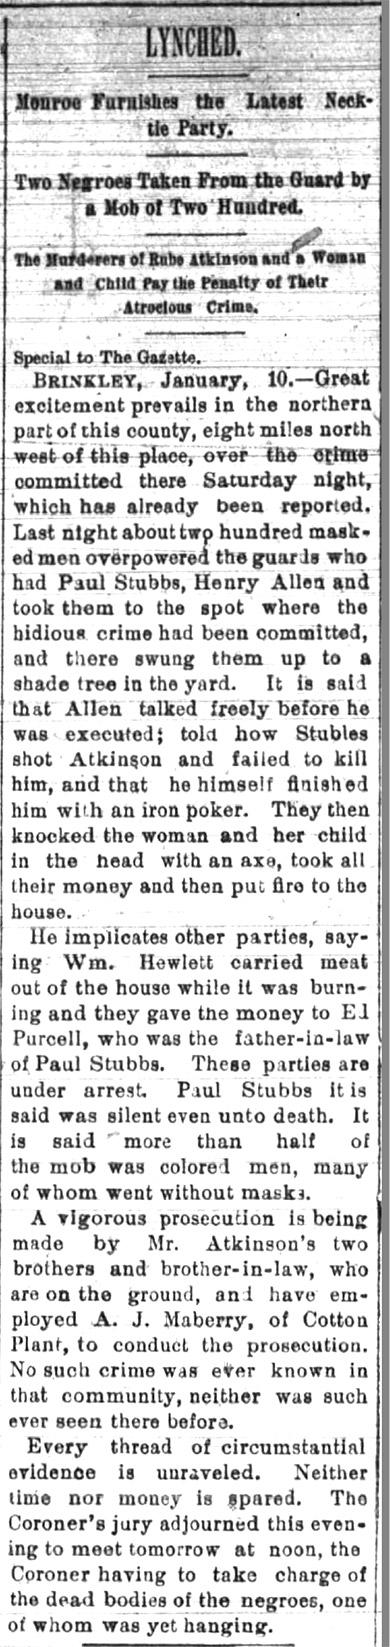 "Lynched" newspaper clipping